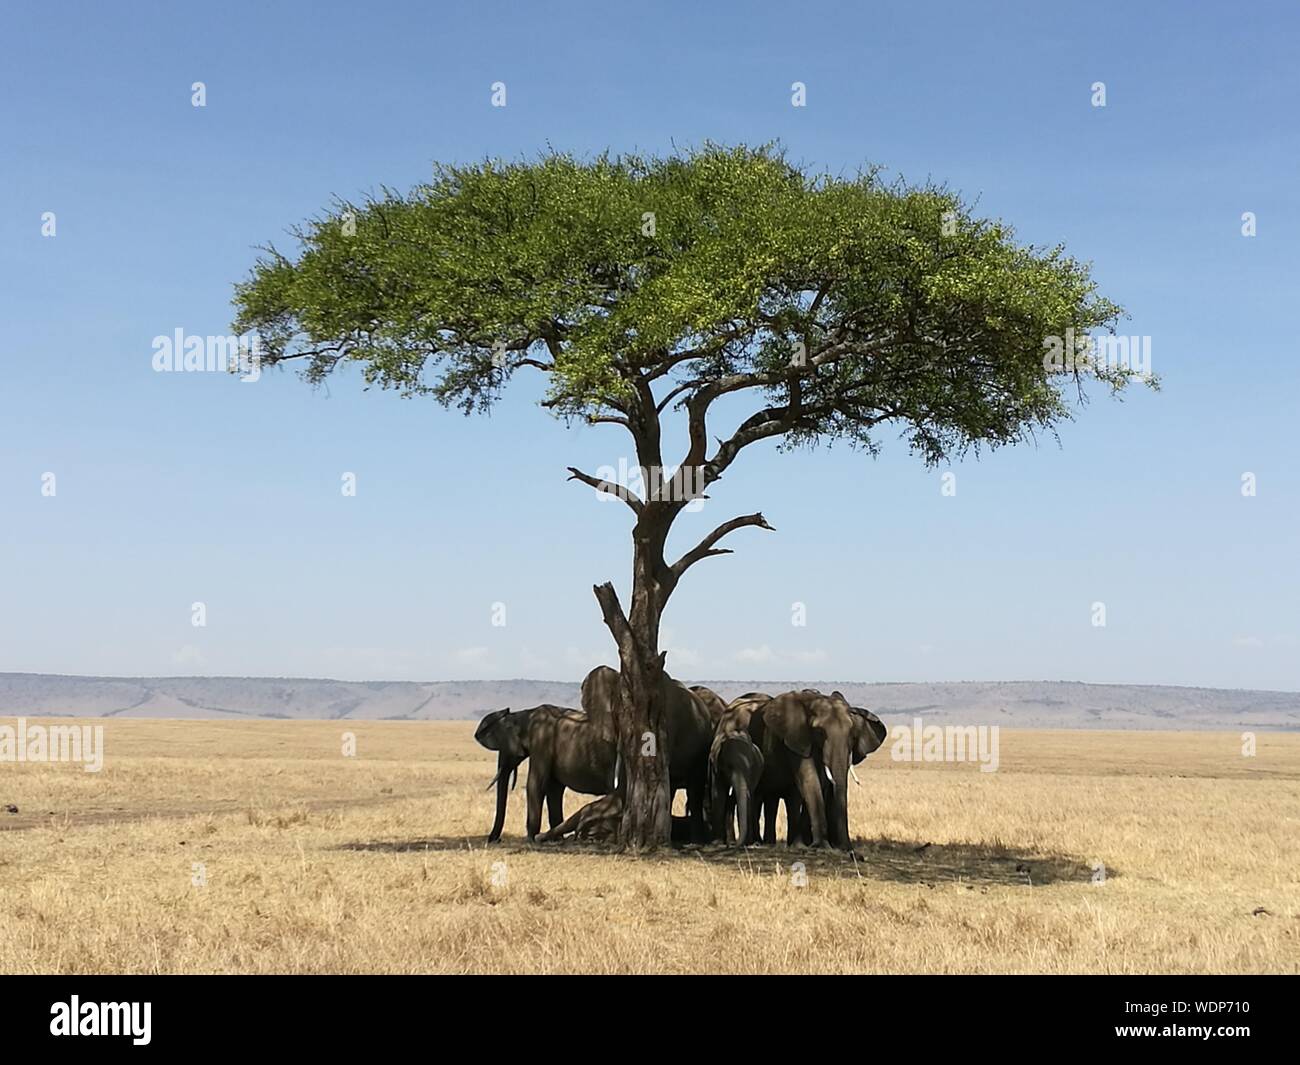 Elephants Under A Tree In A Sunny Day Stock Photo